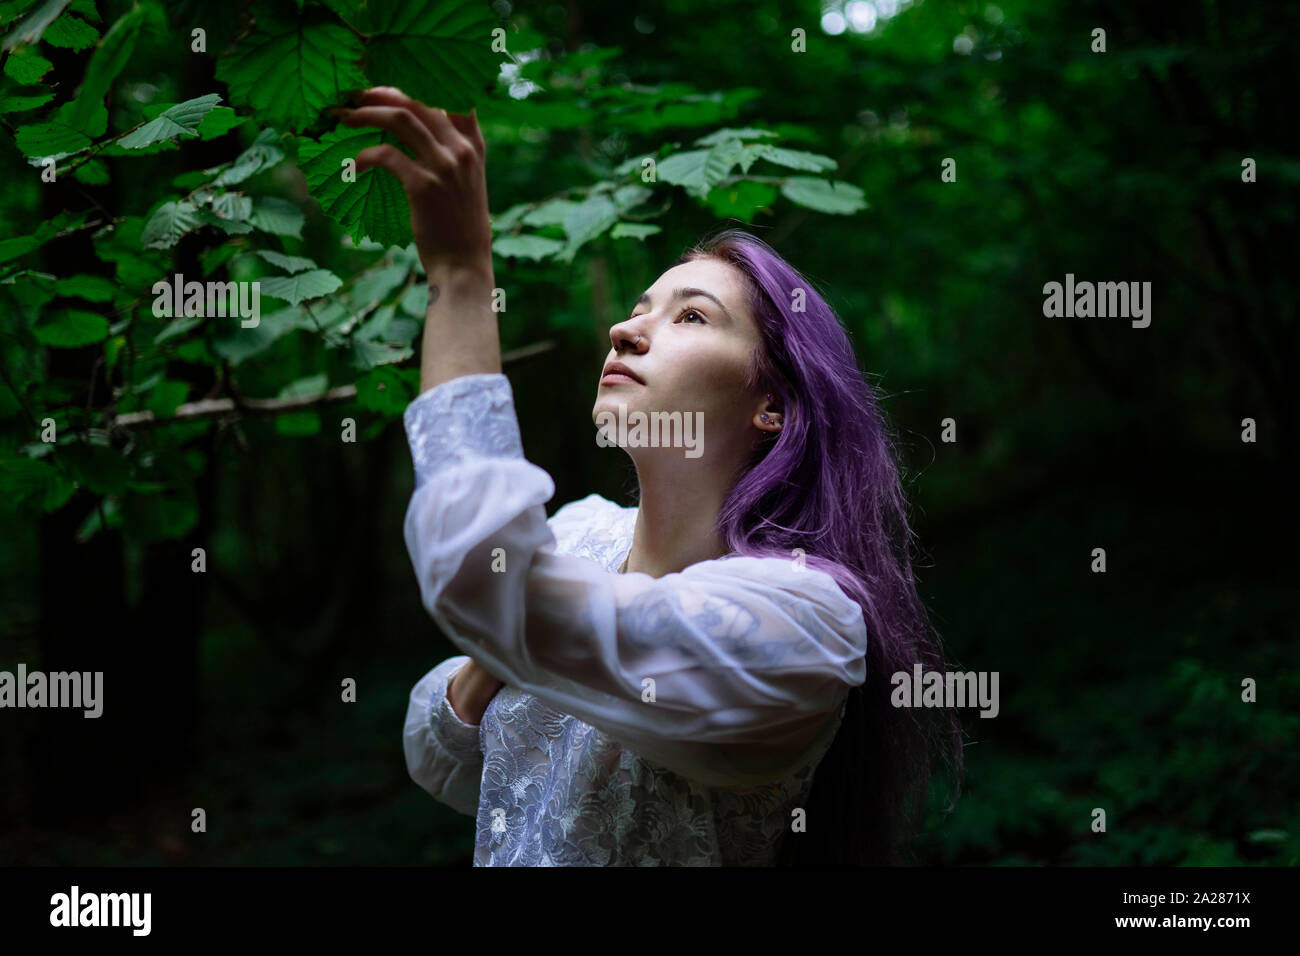 woman reaches for tree branches Stock Photo